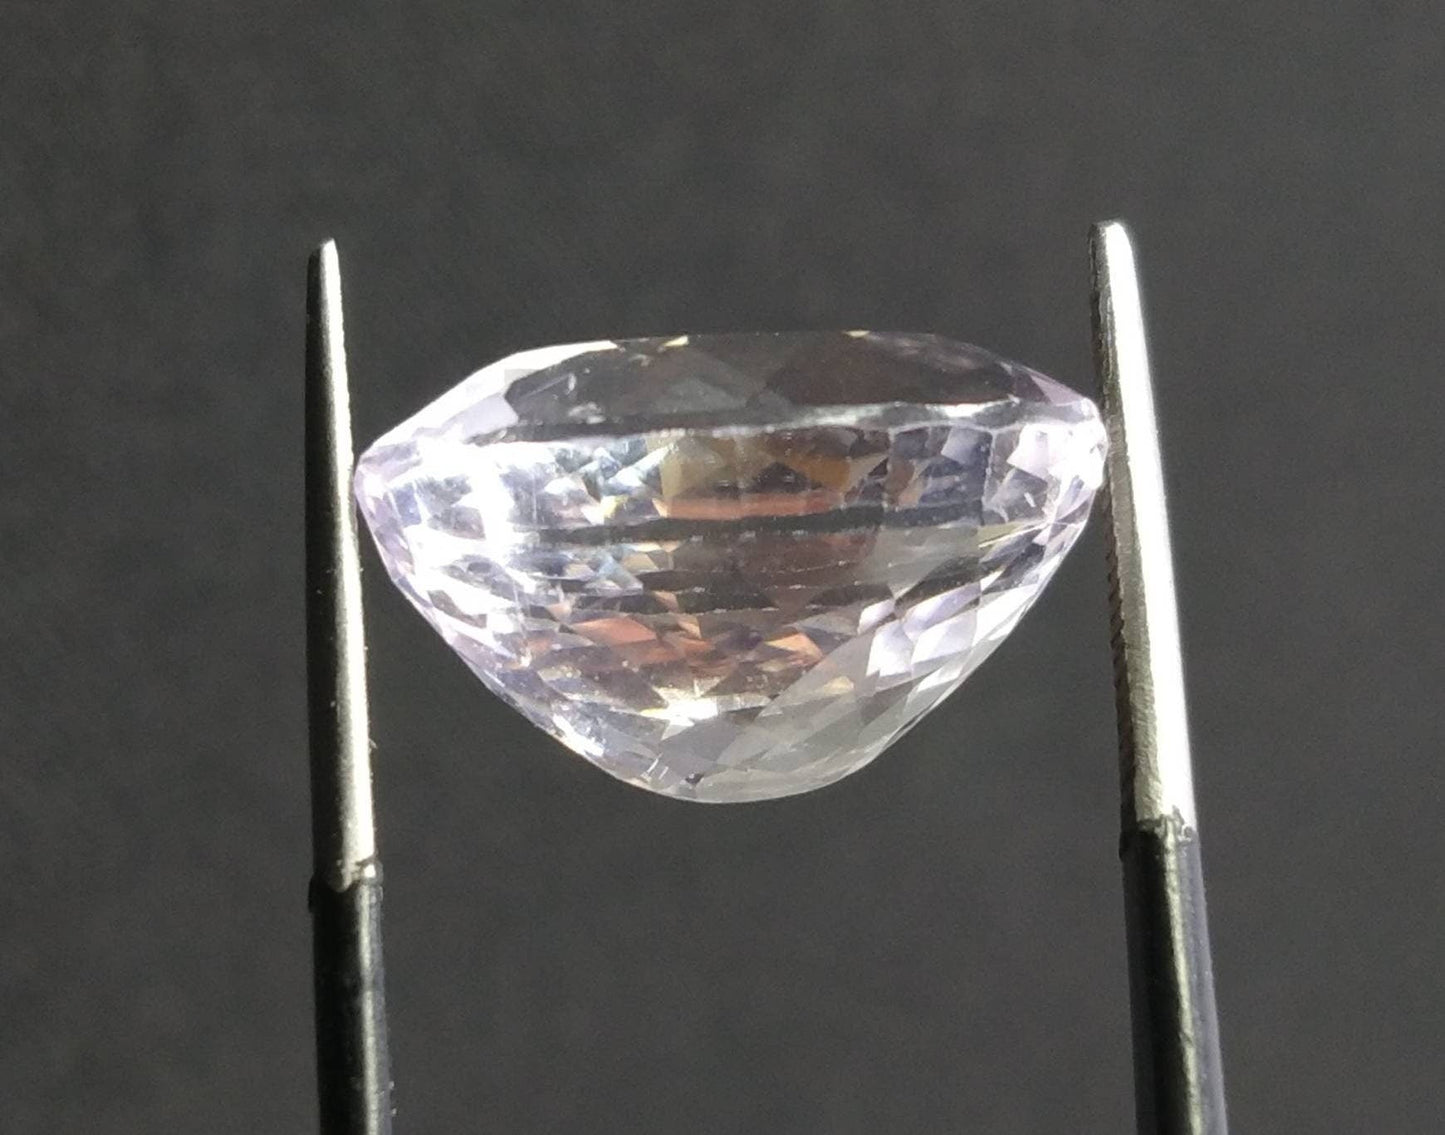 ARSAA GEMS AND MINERALSNatural fine quality beautiful 15 carat oval shape faceted kunzite gem - Premium  from ARSAA GEMS AND MINERALS - Just $30.00! Shop now at ARSAA GEMS AND MINERALS